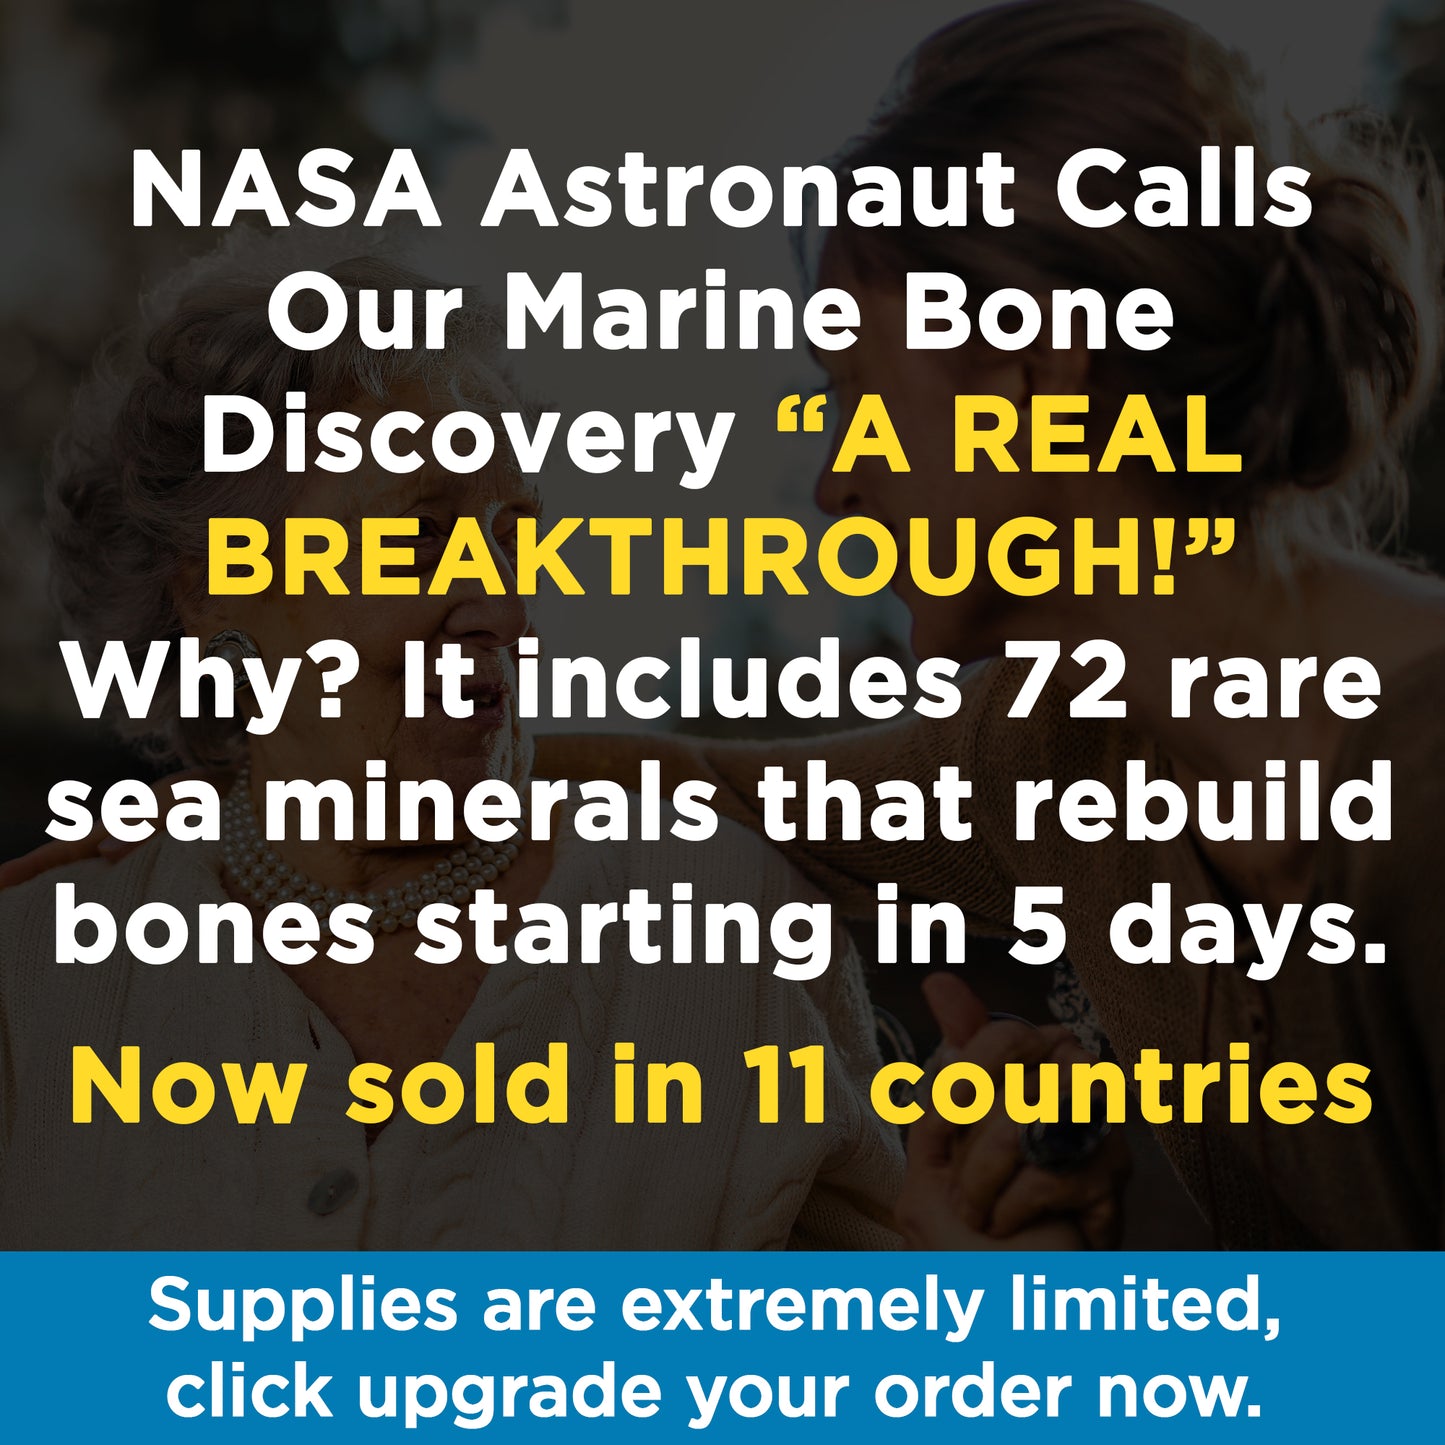 Marine Bone Discovery Buy 2 Get 1 Free for 33.29 per bottle